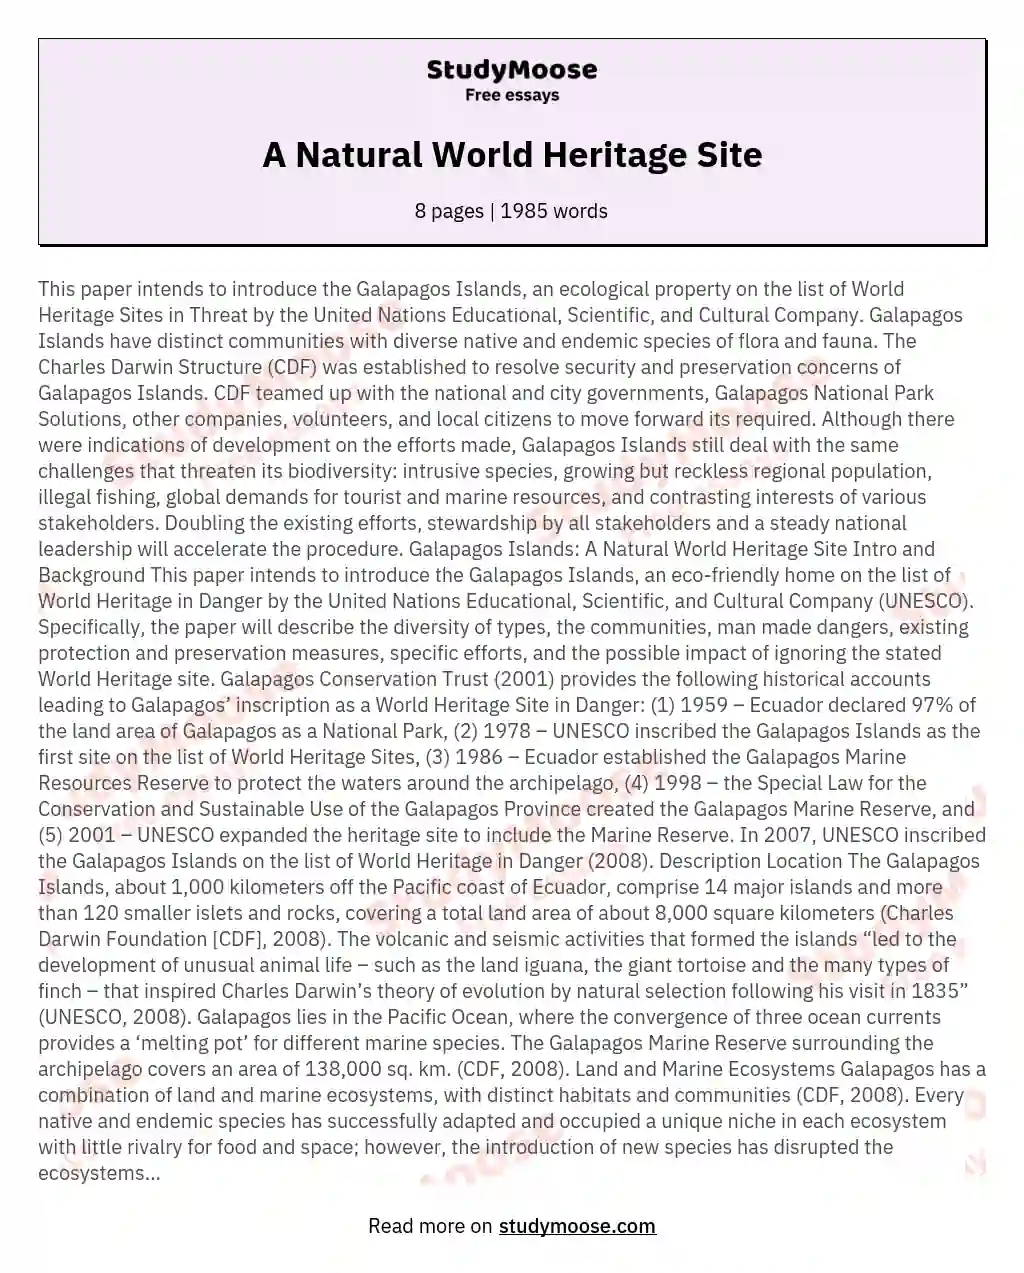 essay about heritage site